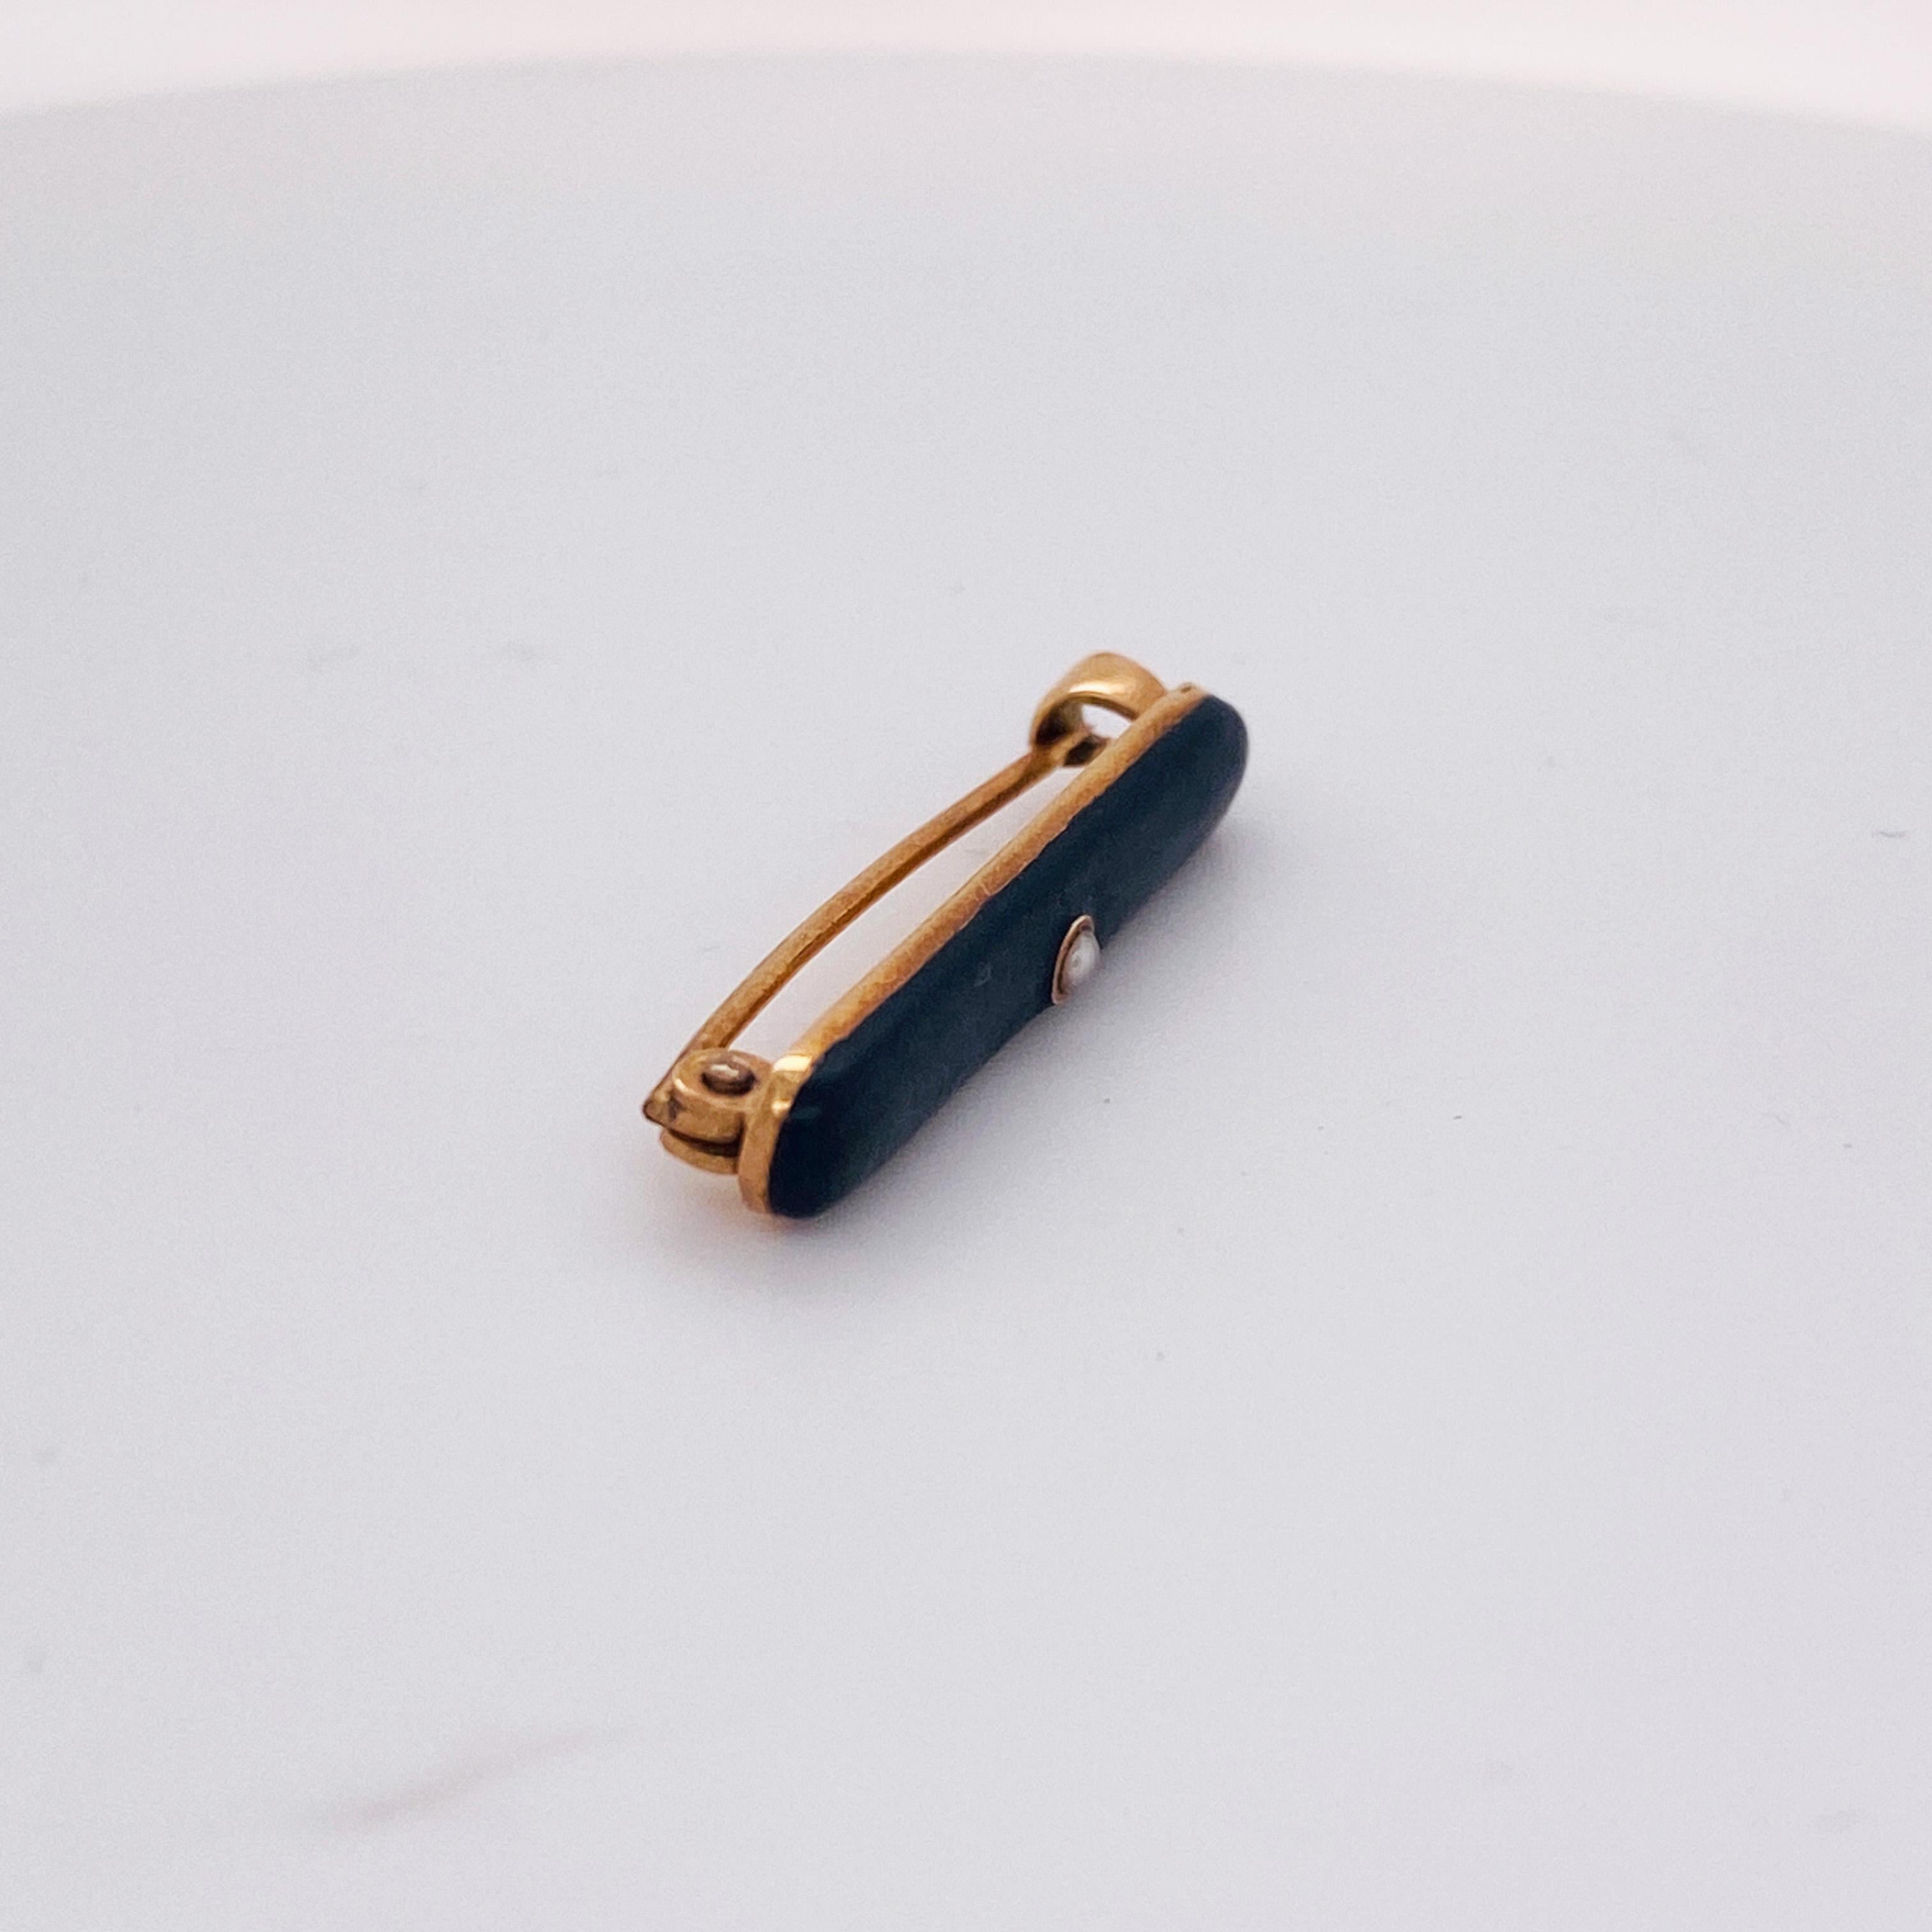 This small black enamel bar pin has a gorgeous cultured pearl in the center and the gold is 14 karat rose gold. This is a retro pin with the rose, black and white colors. The pin is approximately 1.25 inches long and could accent any blouse or